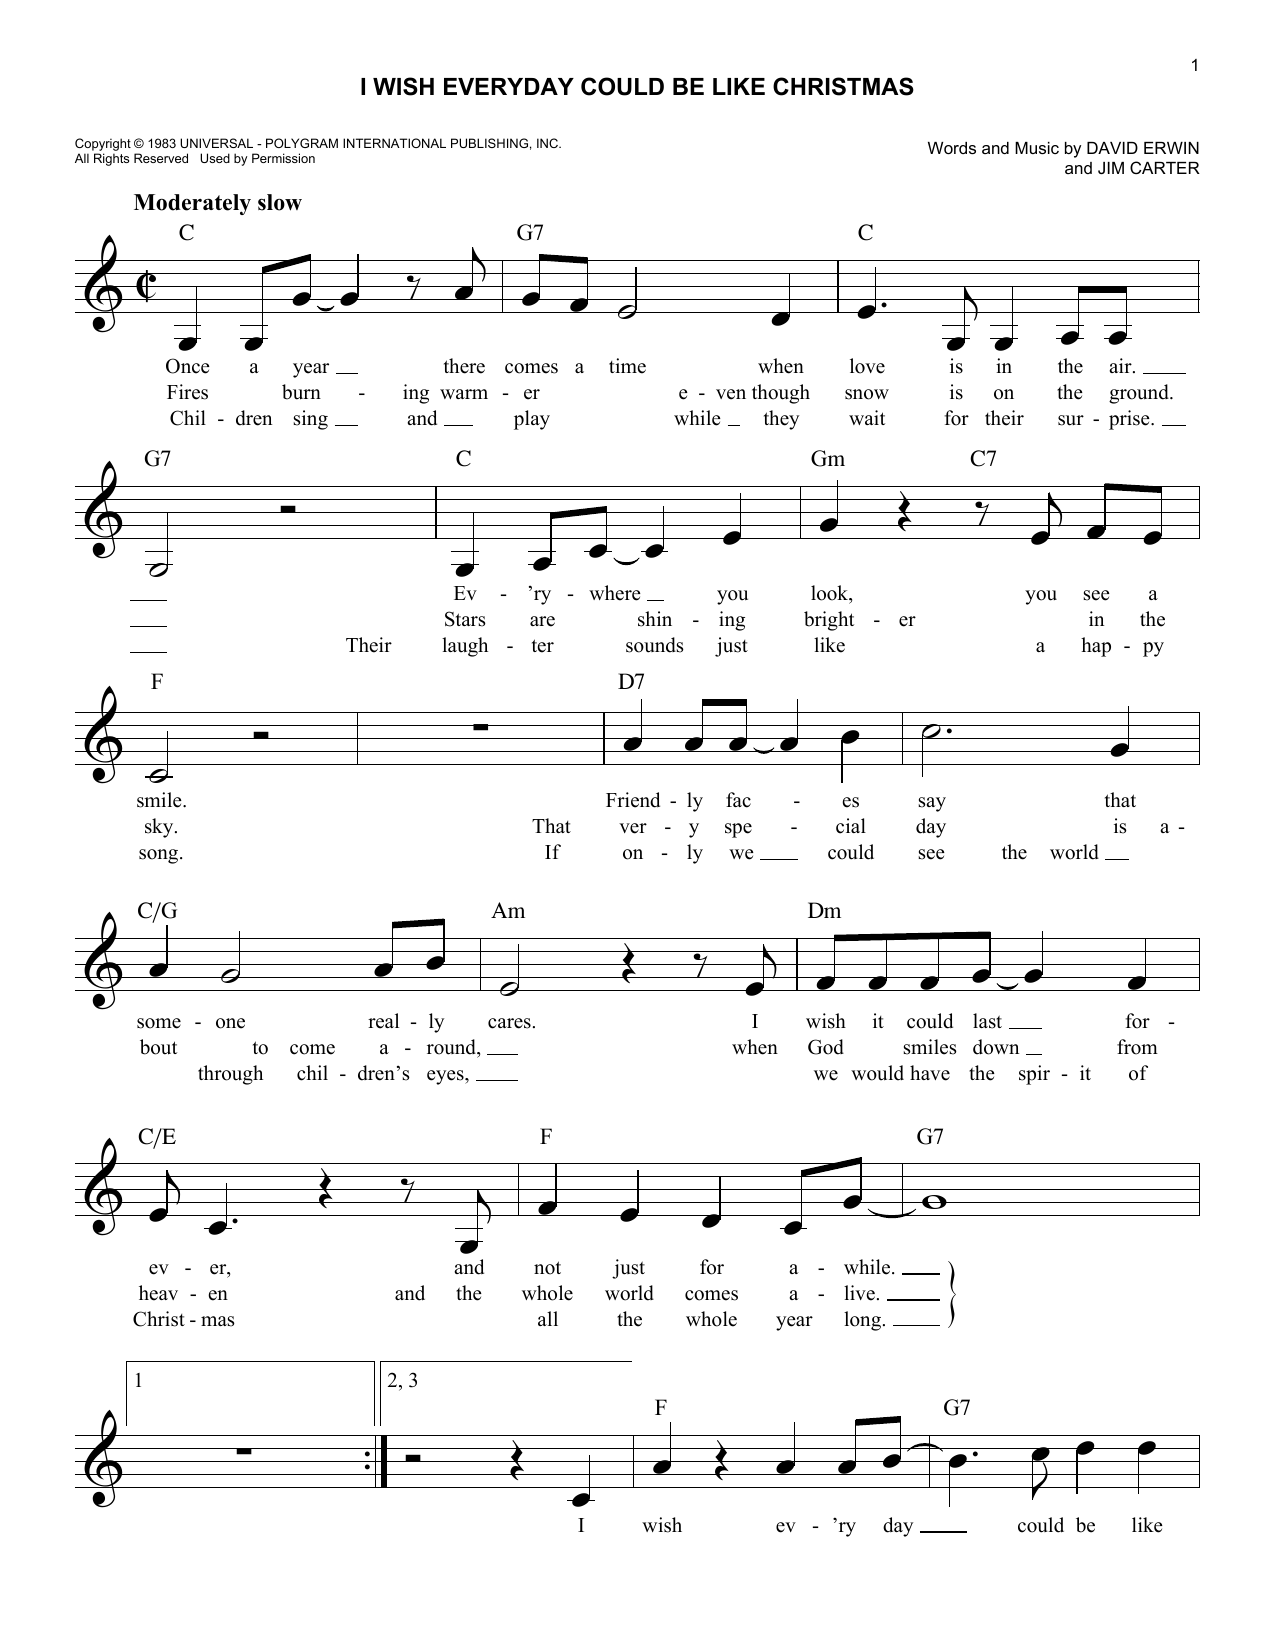 I Wish Everyday Could Be Like Christmas sheet music